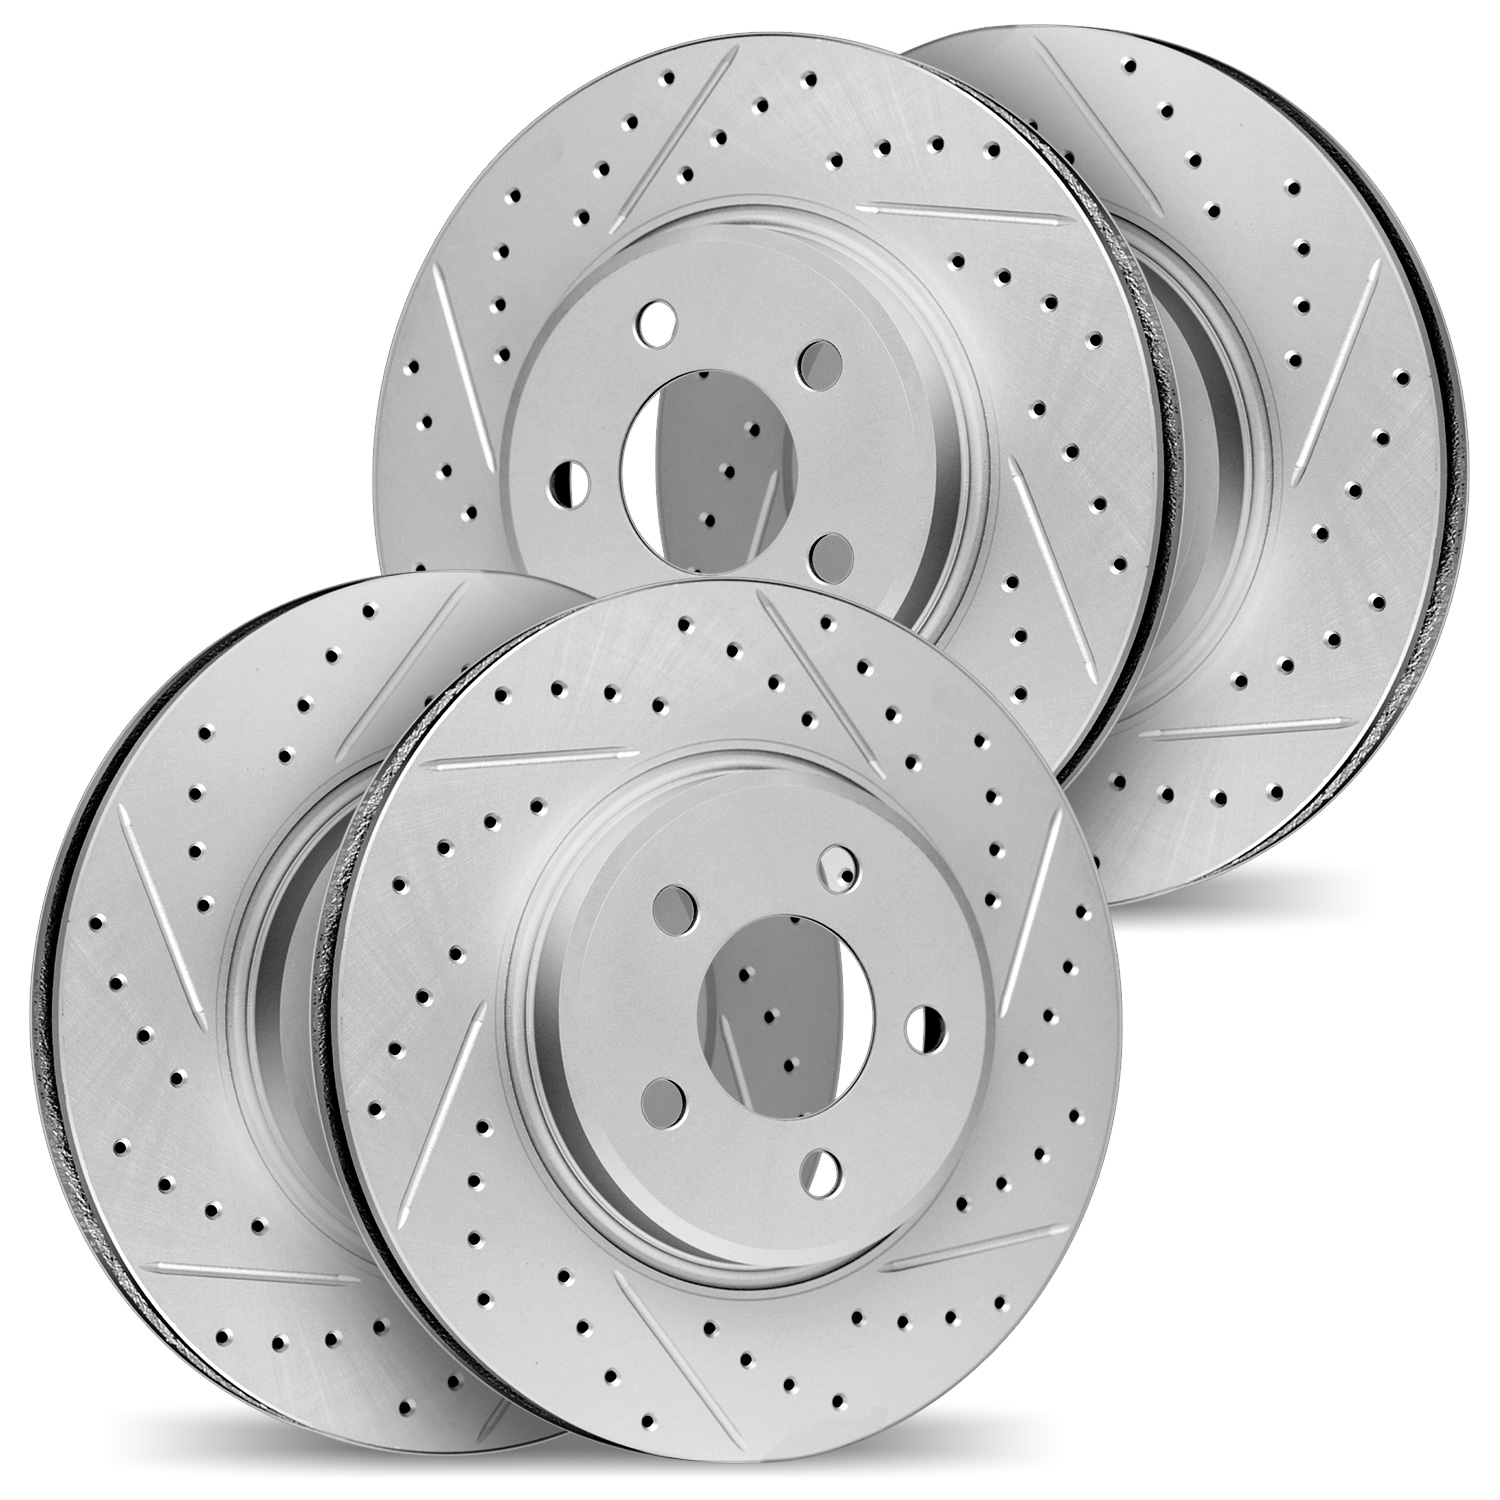 2004-68004 Geoperformance Drilled/Slotted Brake Rotors, Fits Select Infiniti/Nissan, Position: Front and Rear